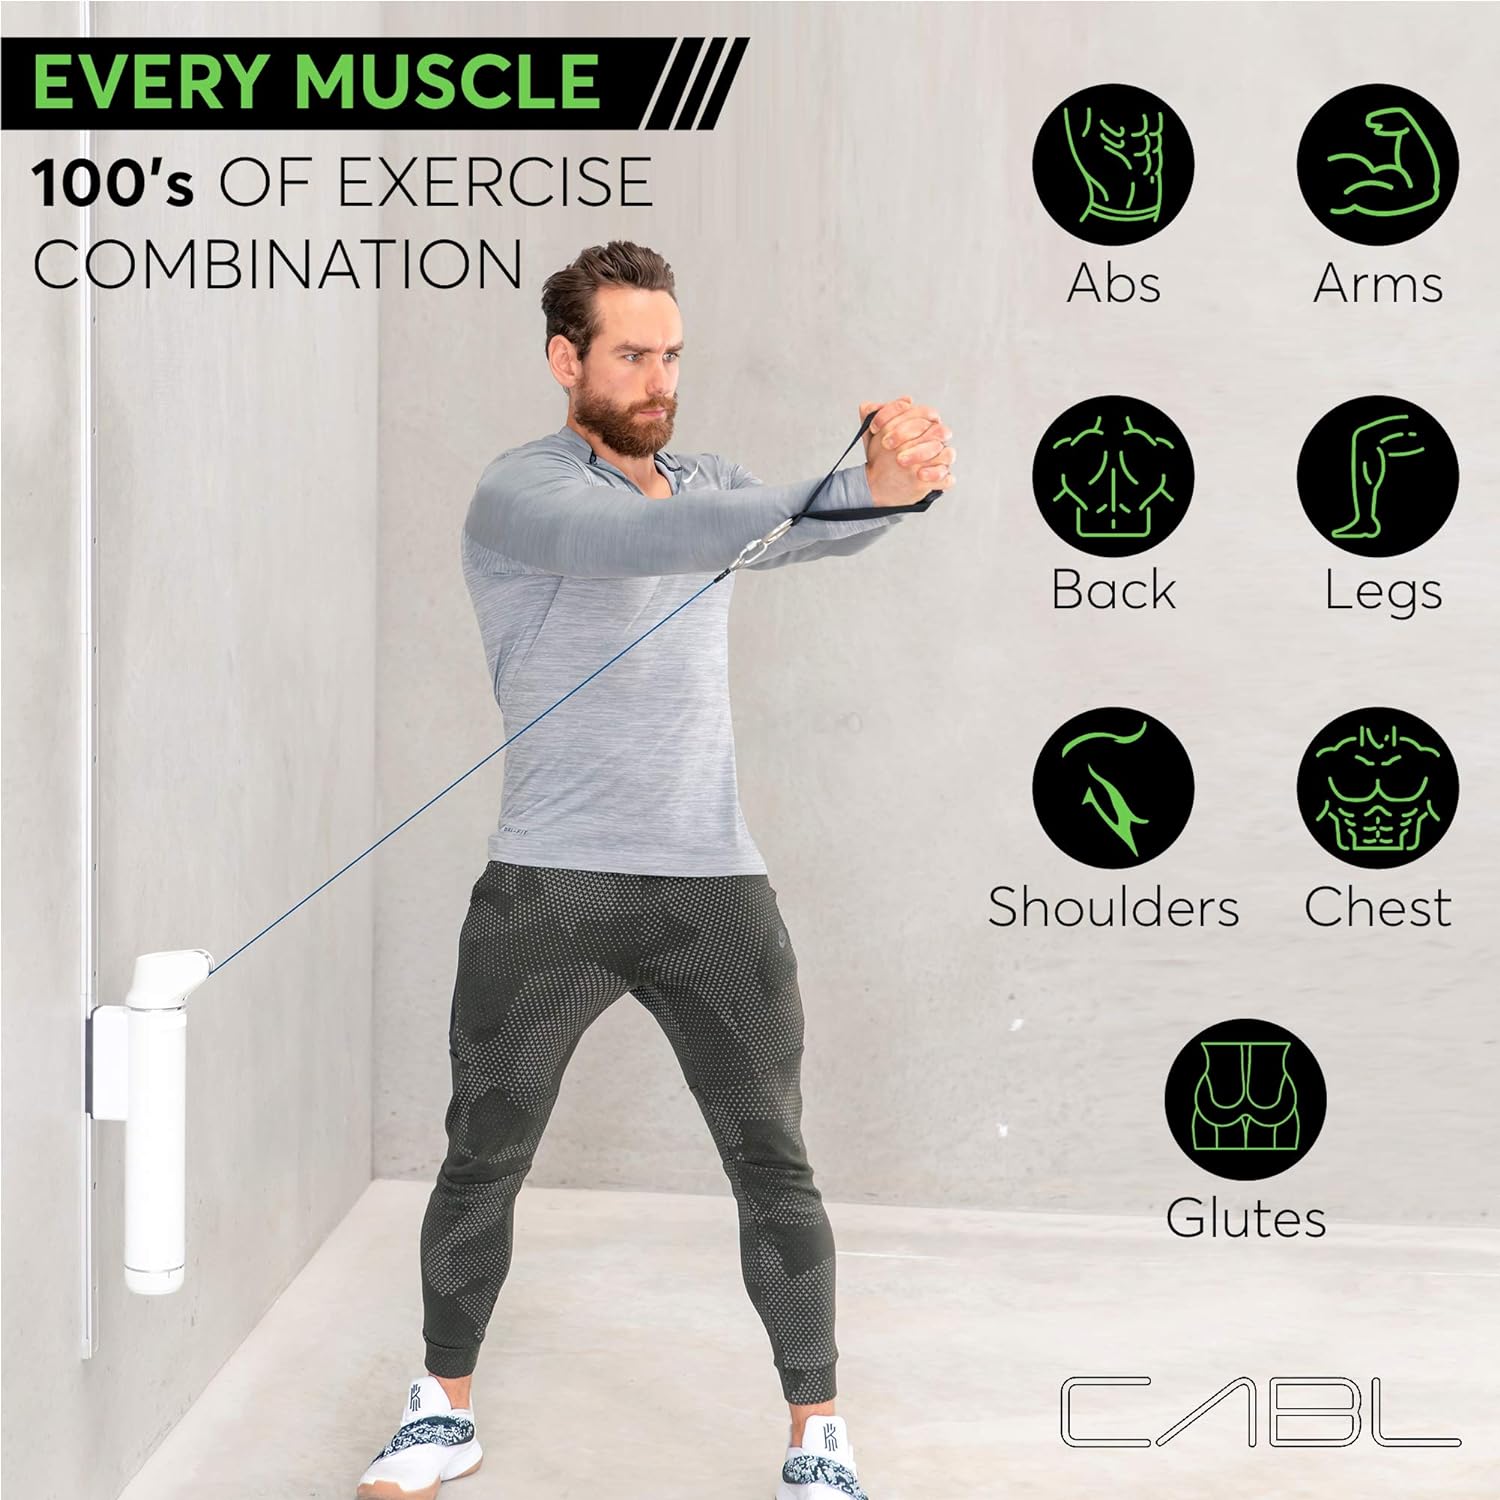 CABLfit Pulley System Review